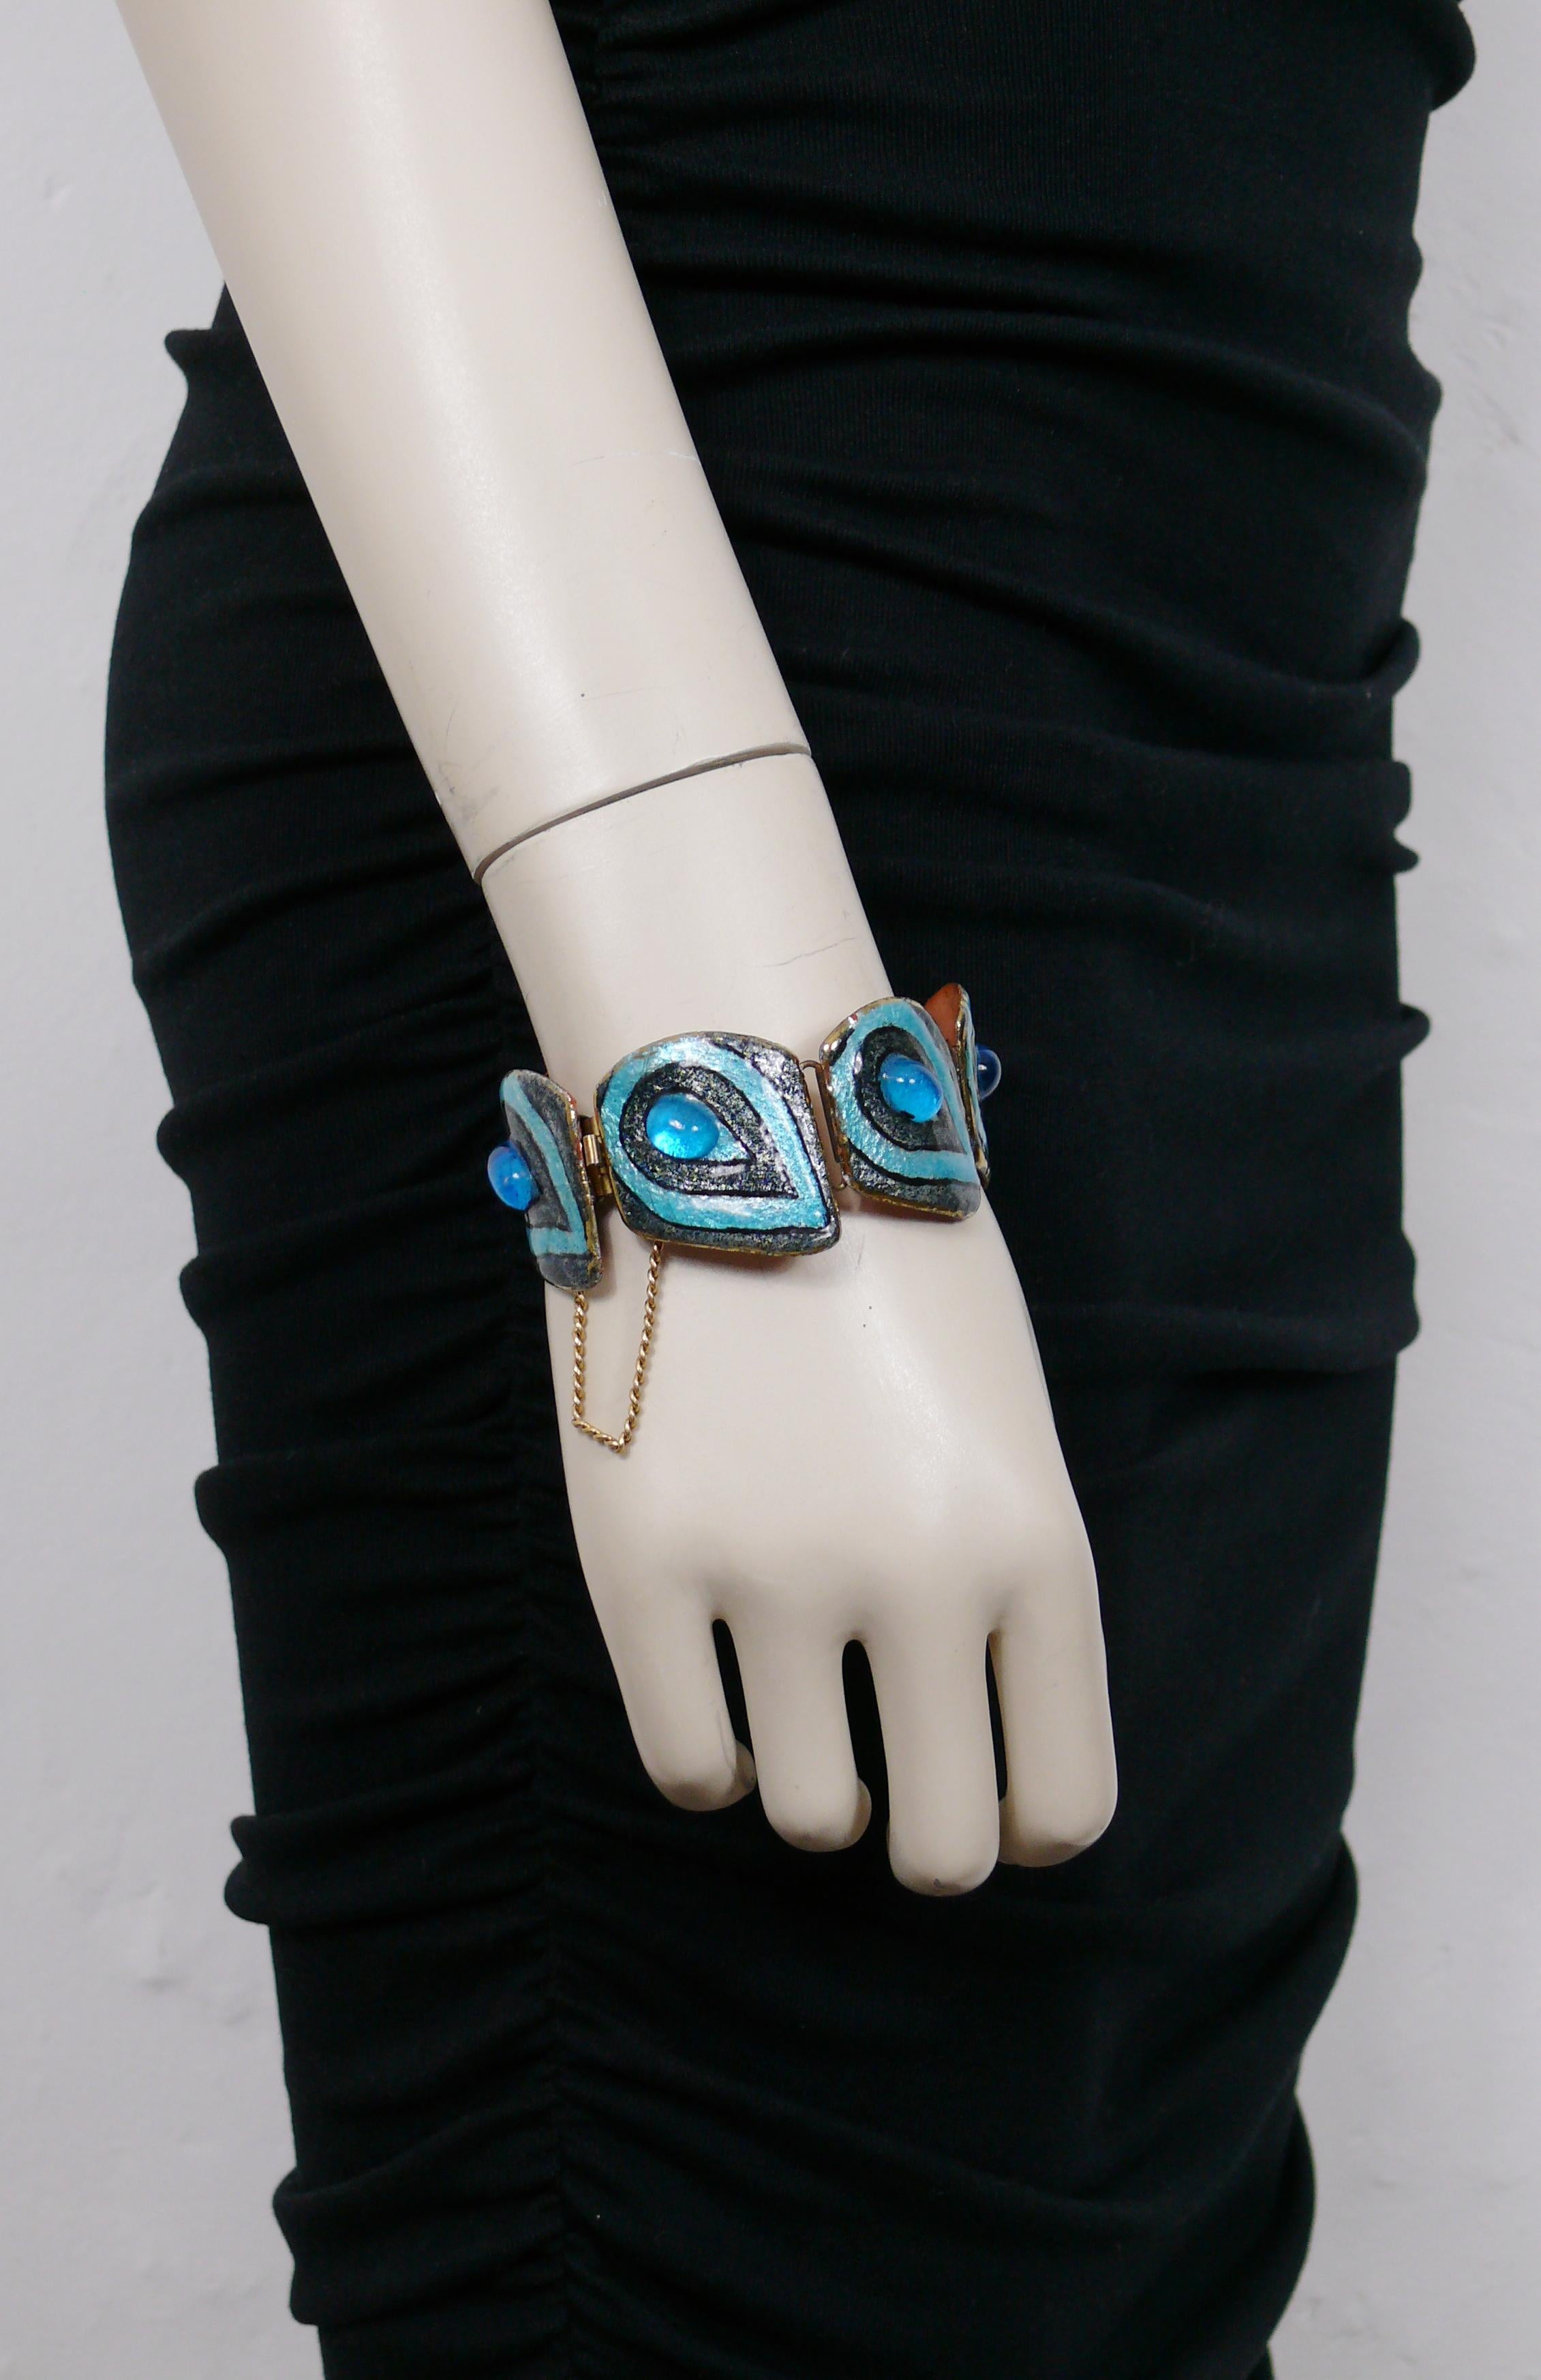 ANDREE BAZOT vintage bracelet featuring blue shade and black enameled links embellished with a blue glass cabochon.

Signed ANDREE BAZOT.

Indicative measurements : circumference approx. 19.48 cm (7.67 inches) / width of the links max. 3.2 cm (1.26